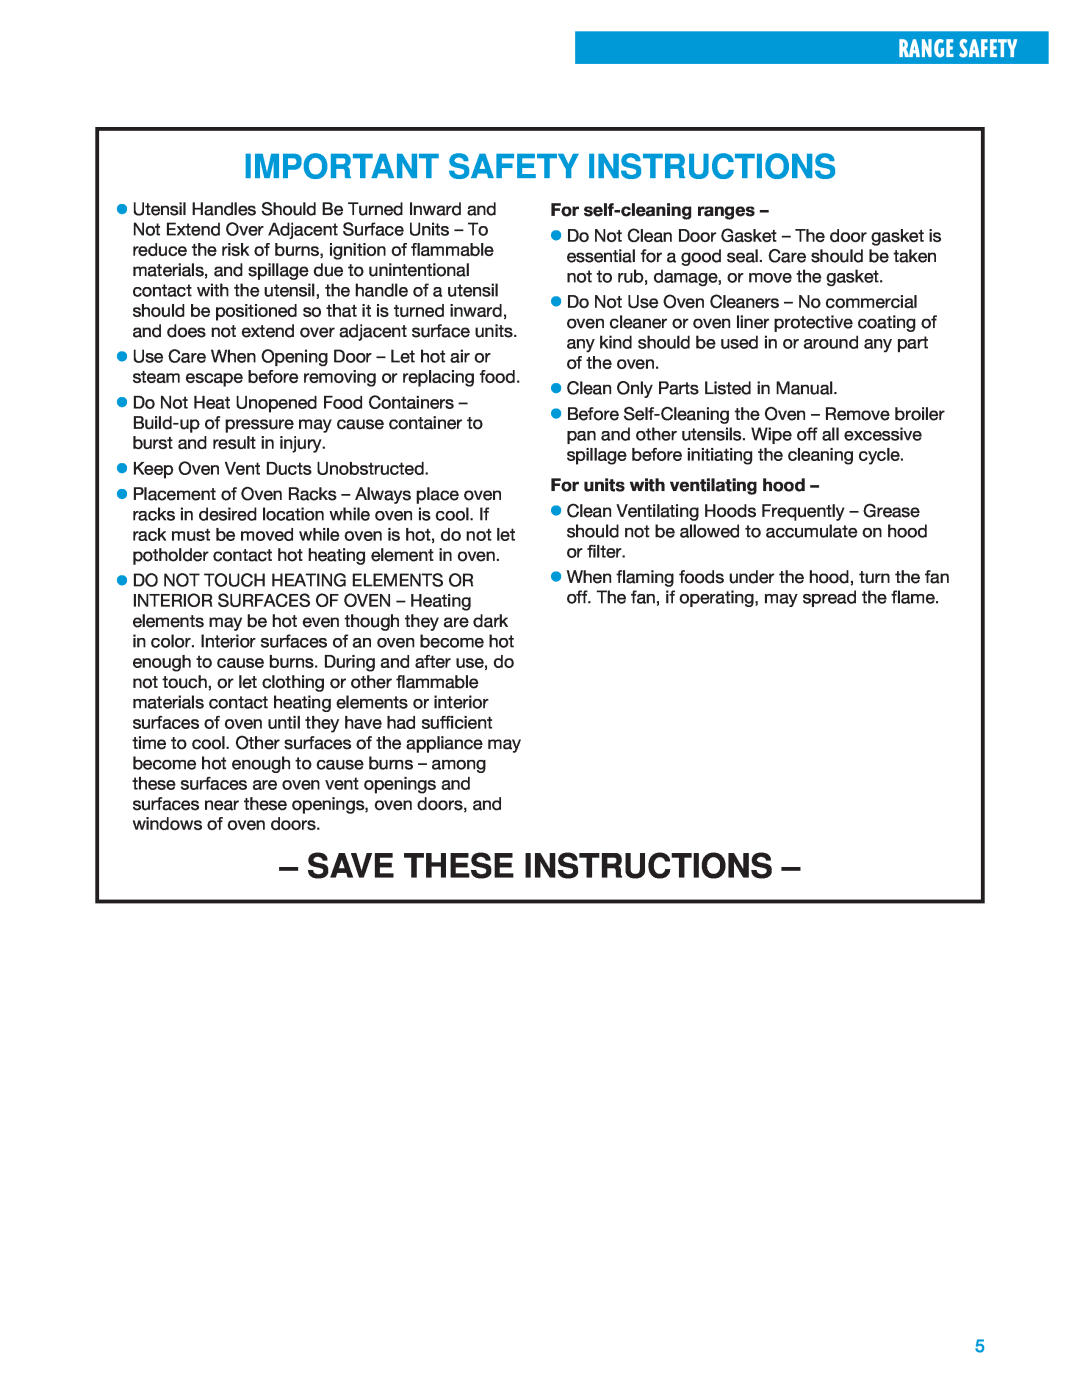 Whirlpool SF325PEE warranty Important Safety Instructions, Save These Instructions, Range Safety, For self-cleaning ranges 